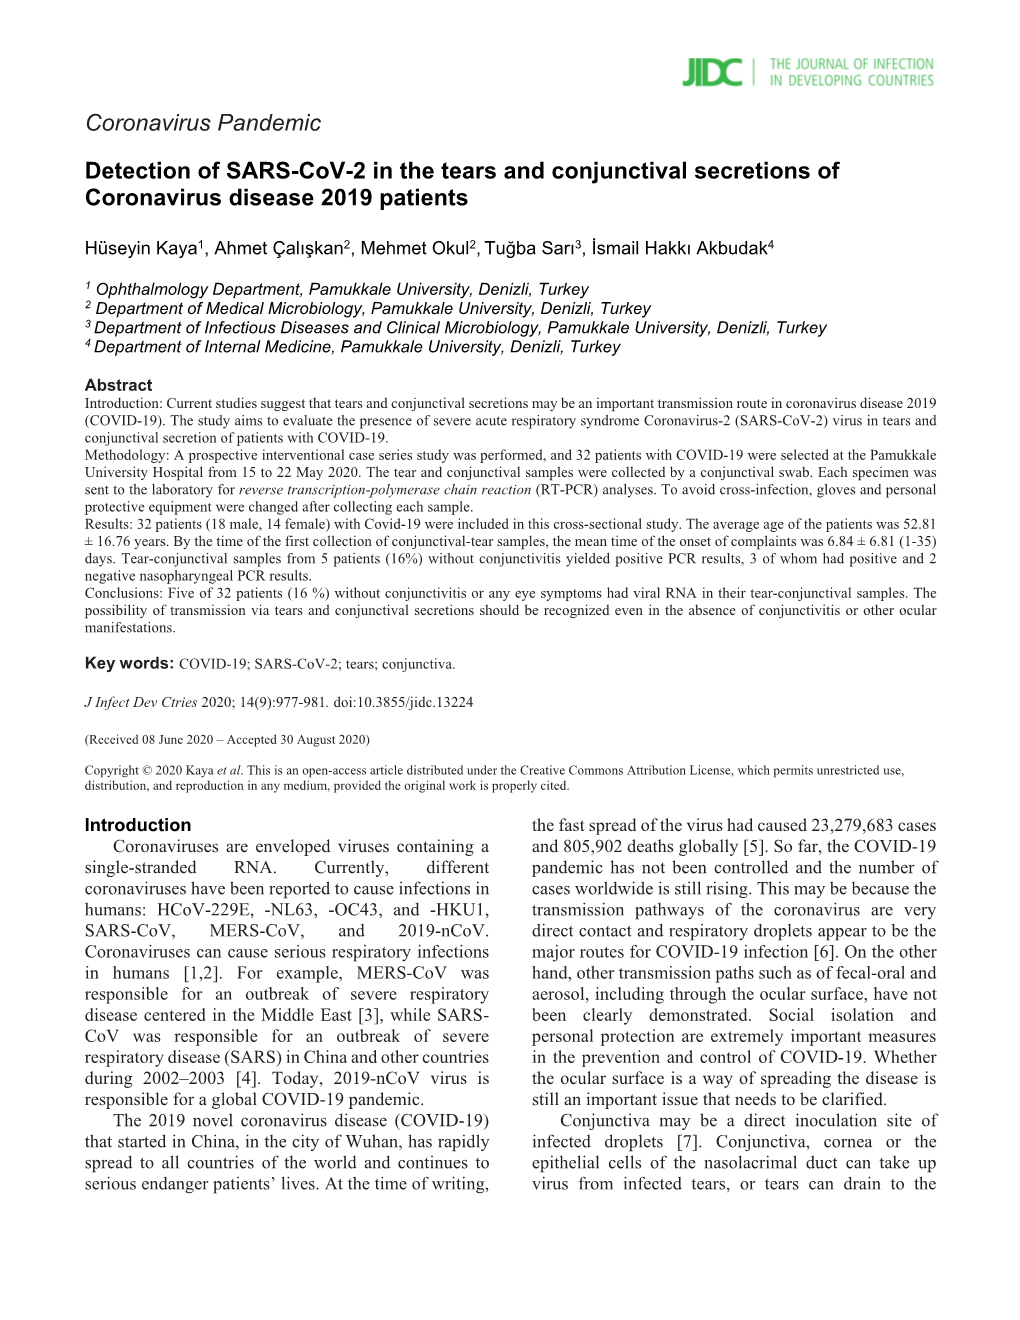 Coronavirus Pandemic Detection of SARS-Cov-2 in the Tears And